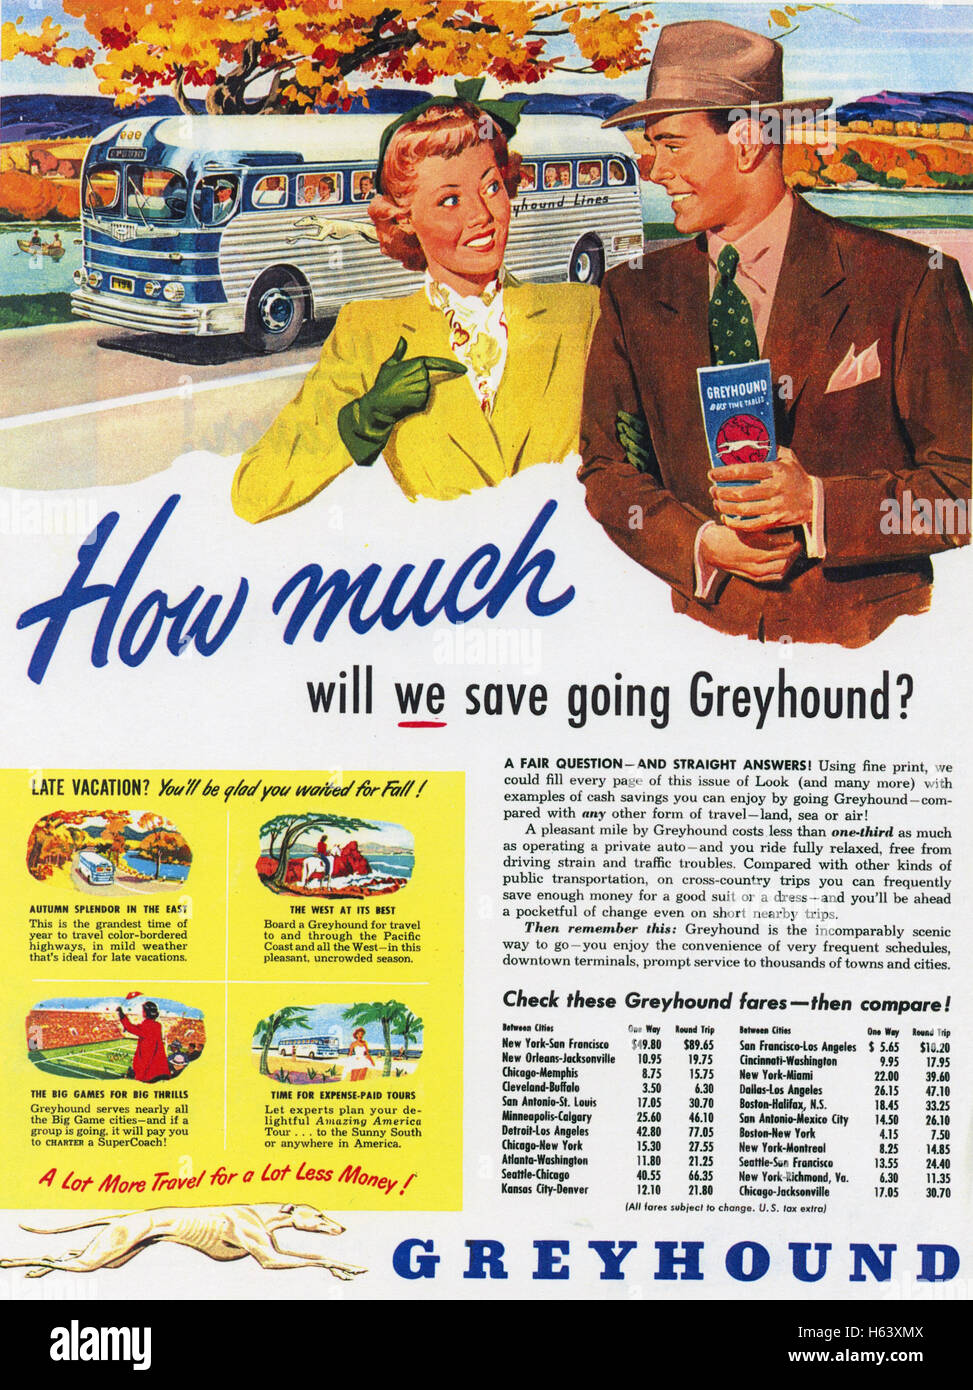 GREYHOUND BUS advert 1949 showing the GMC PD-3751 Silversides coach in the background Stock Photo